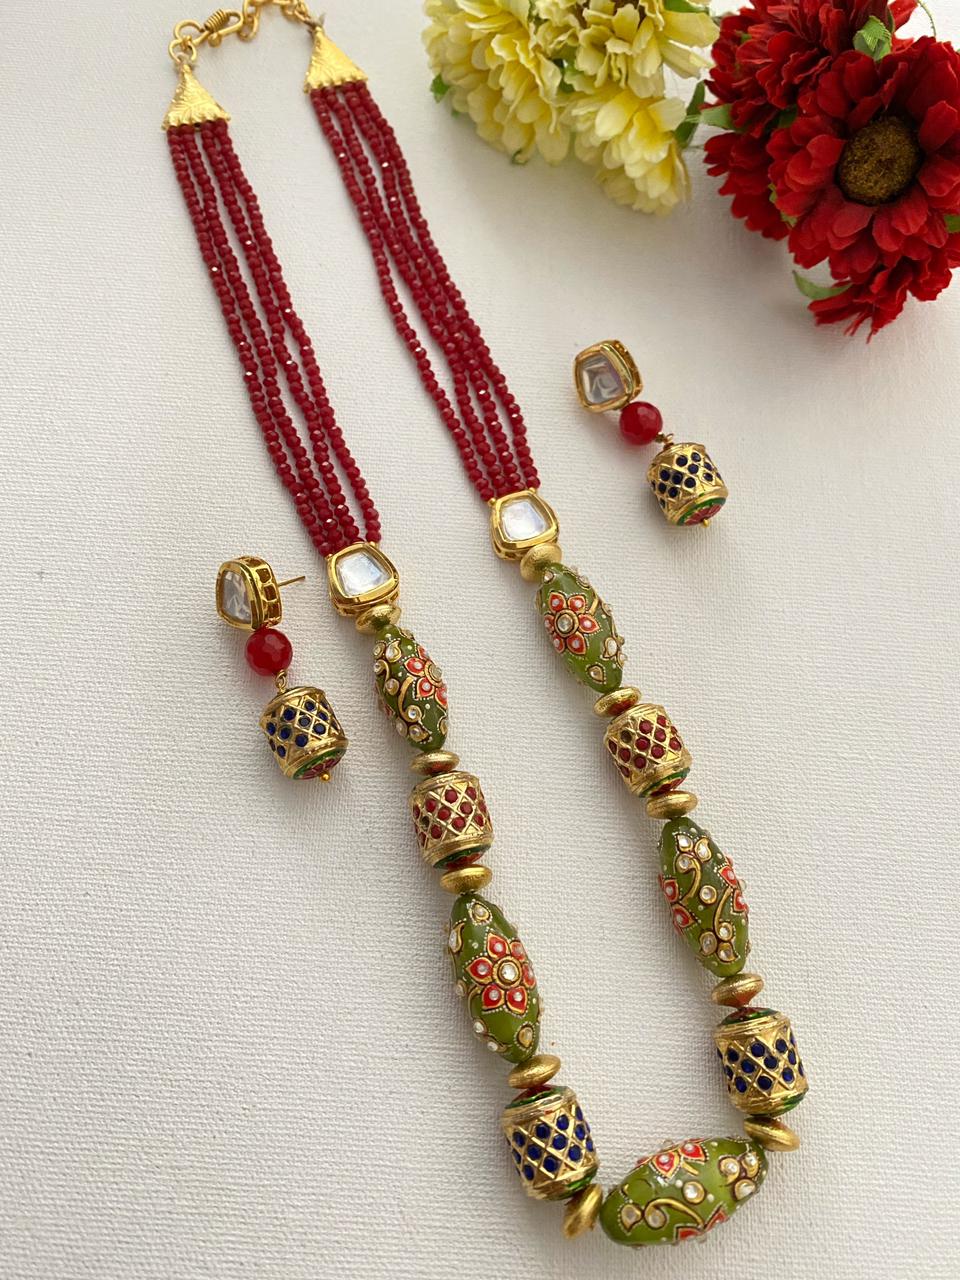 Designer Handcrafted Red Crystal Beads Necklace For Ladies By Gehna Shop Beads Jewellery